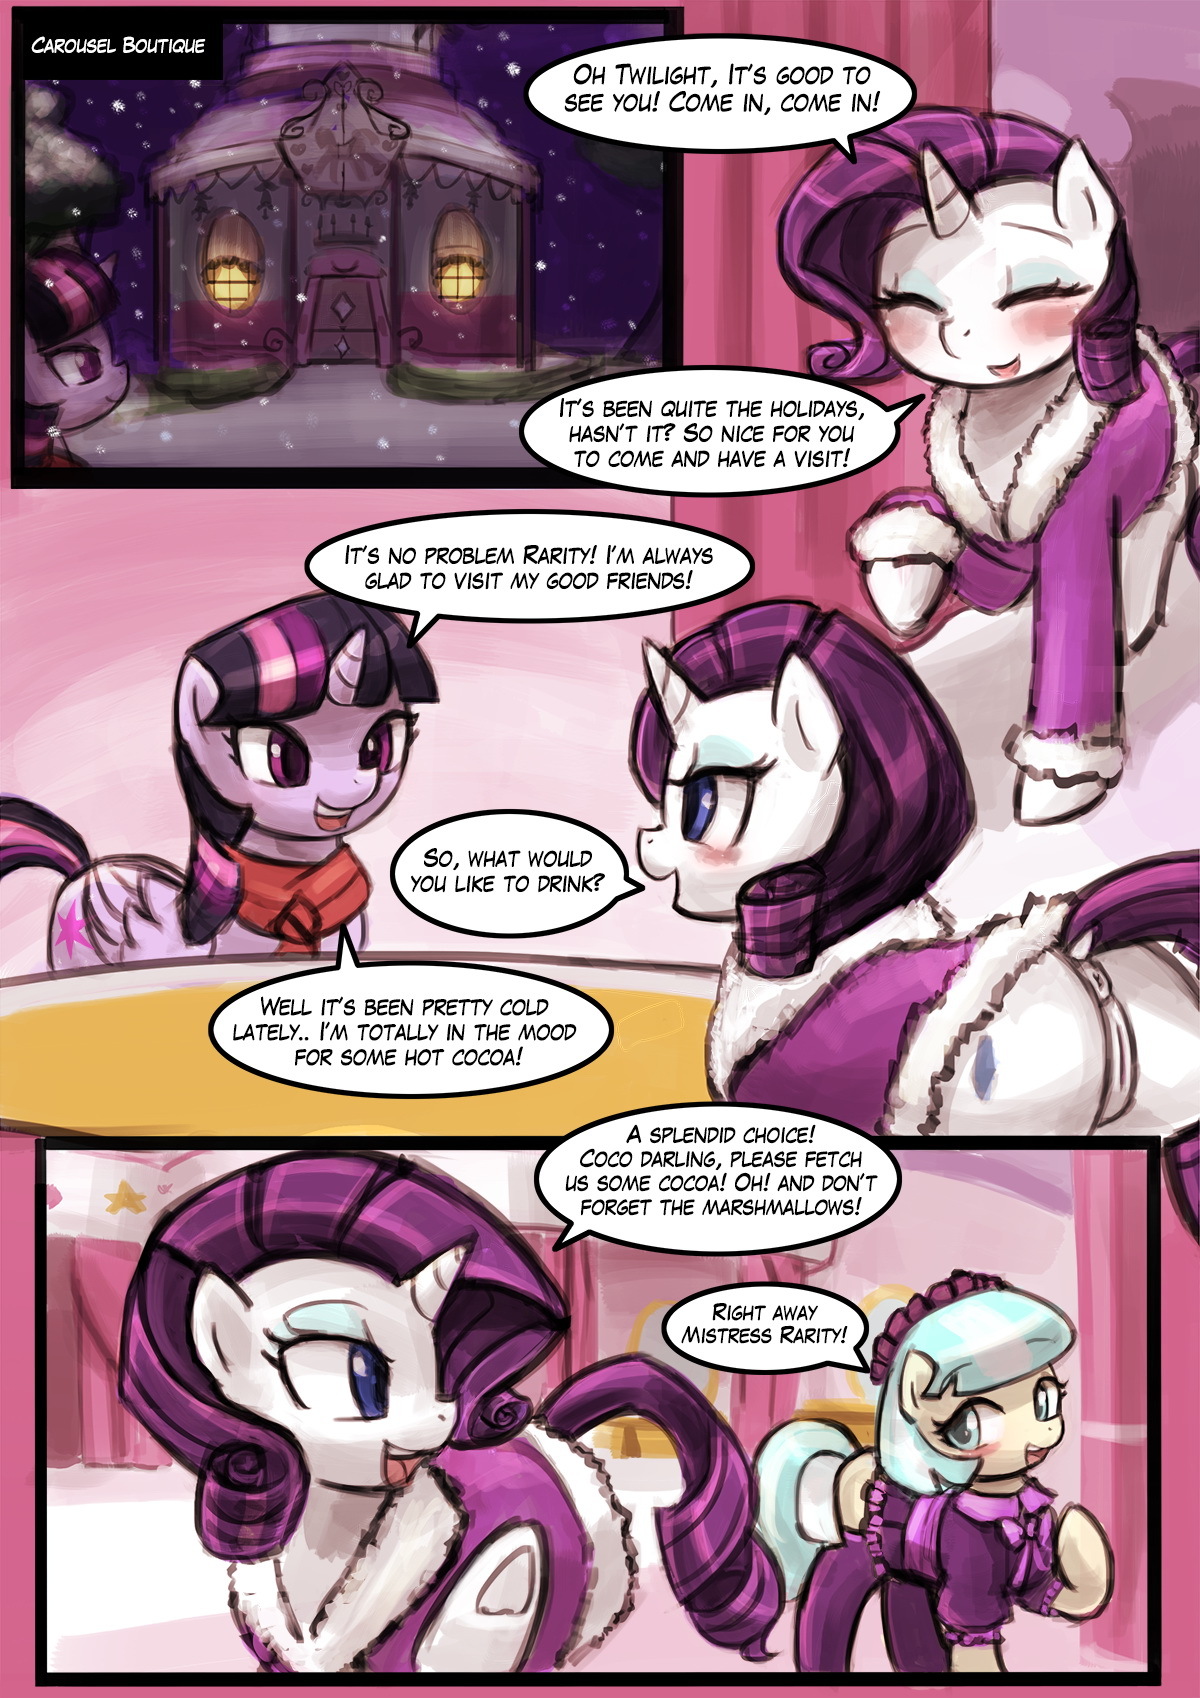 Hot Cocoa with Marshmallows - Page 2